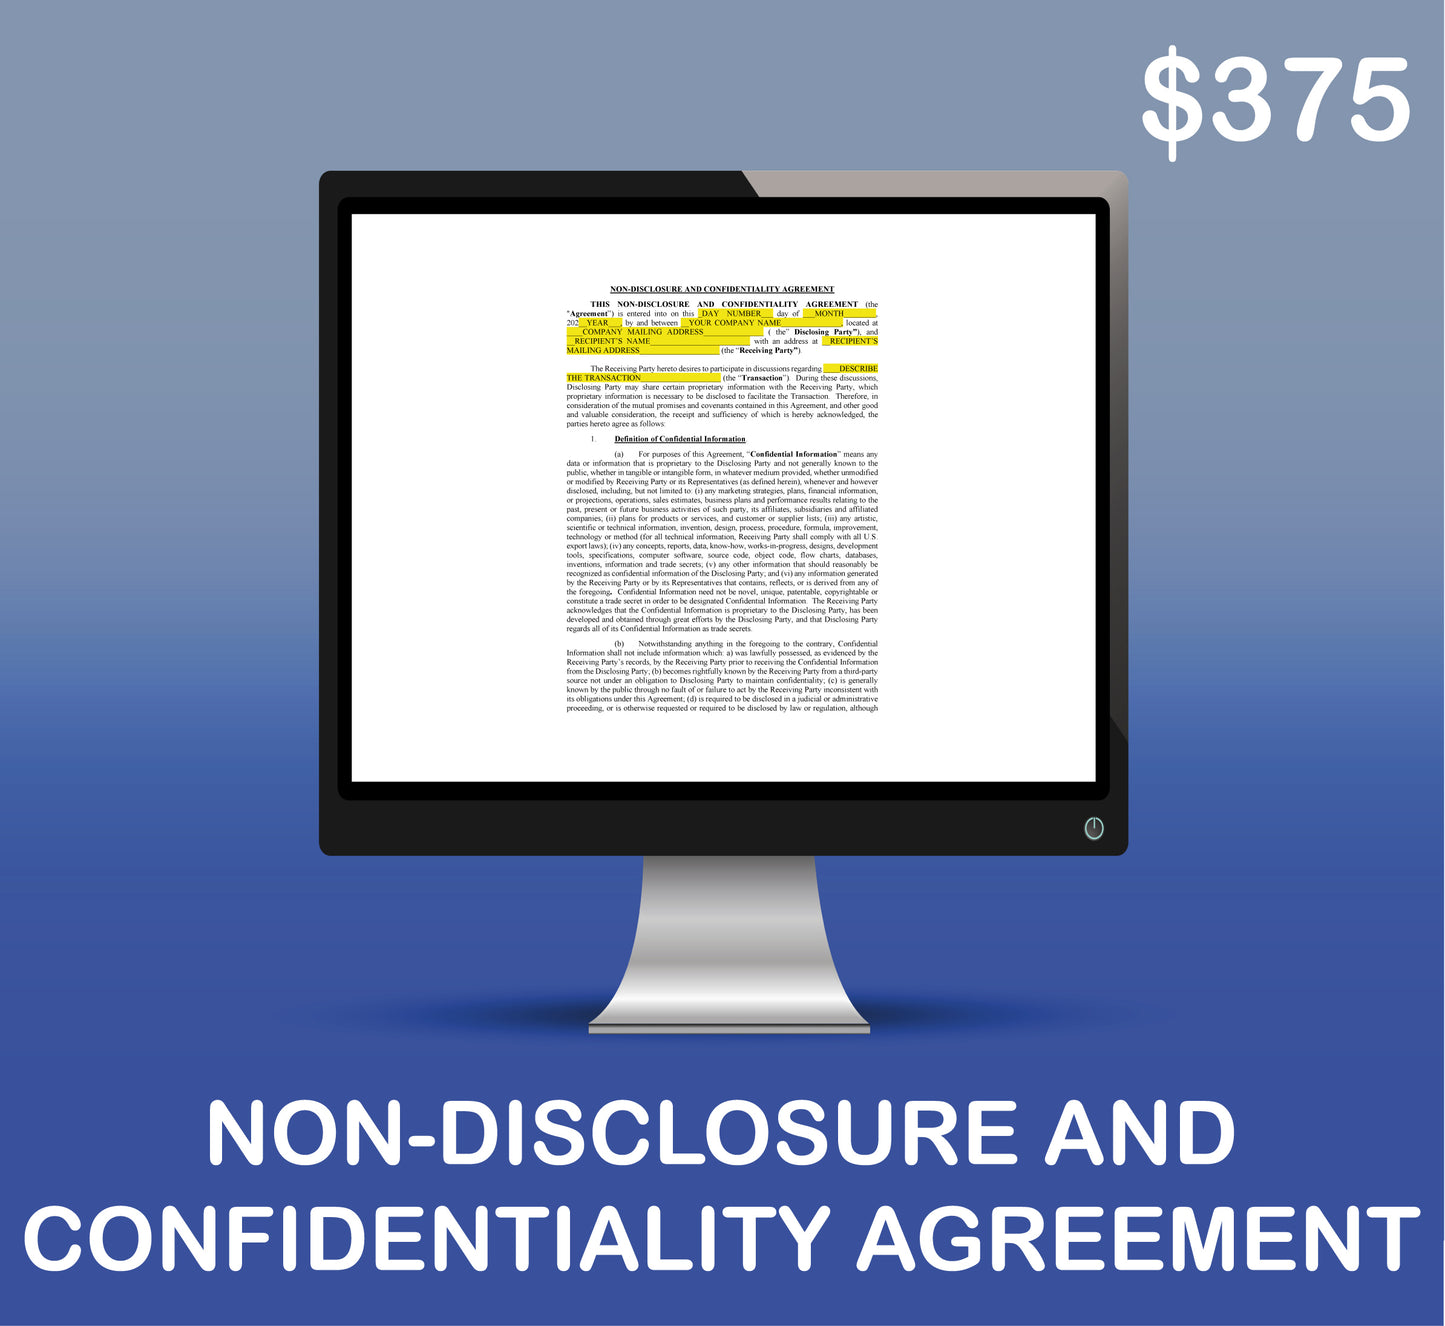 Non-Disclosure and Confidentiality Agreement